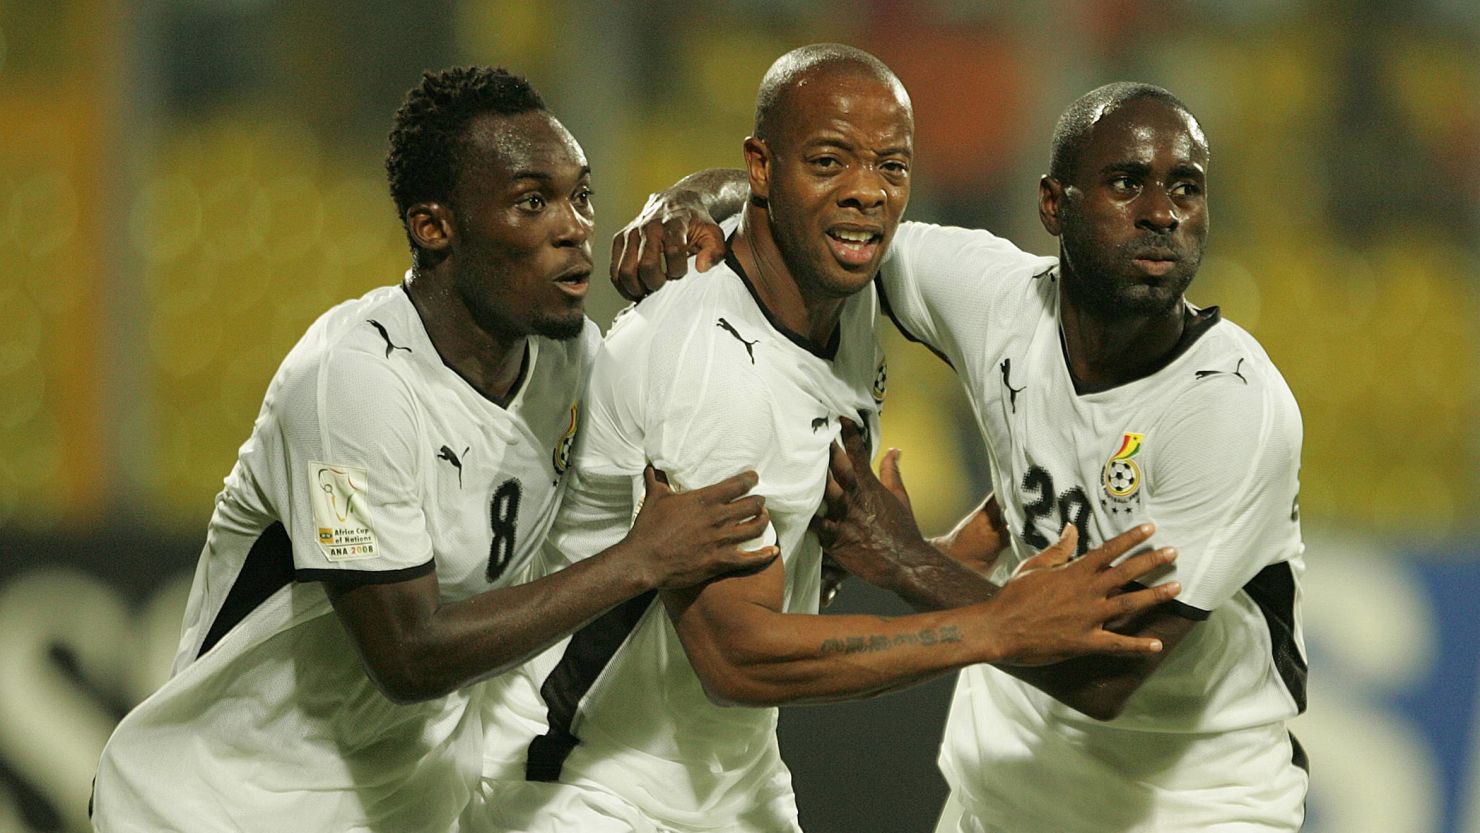 Michael Essien, Manuel Junior Agogo and Quincy Abeyie Owusu celebrate Agogo's goal in the Africa Cup of Nations third place match in 2008.